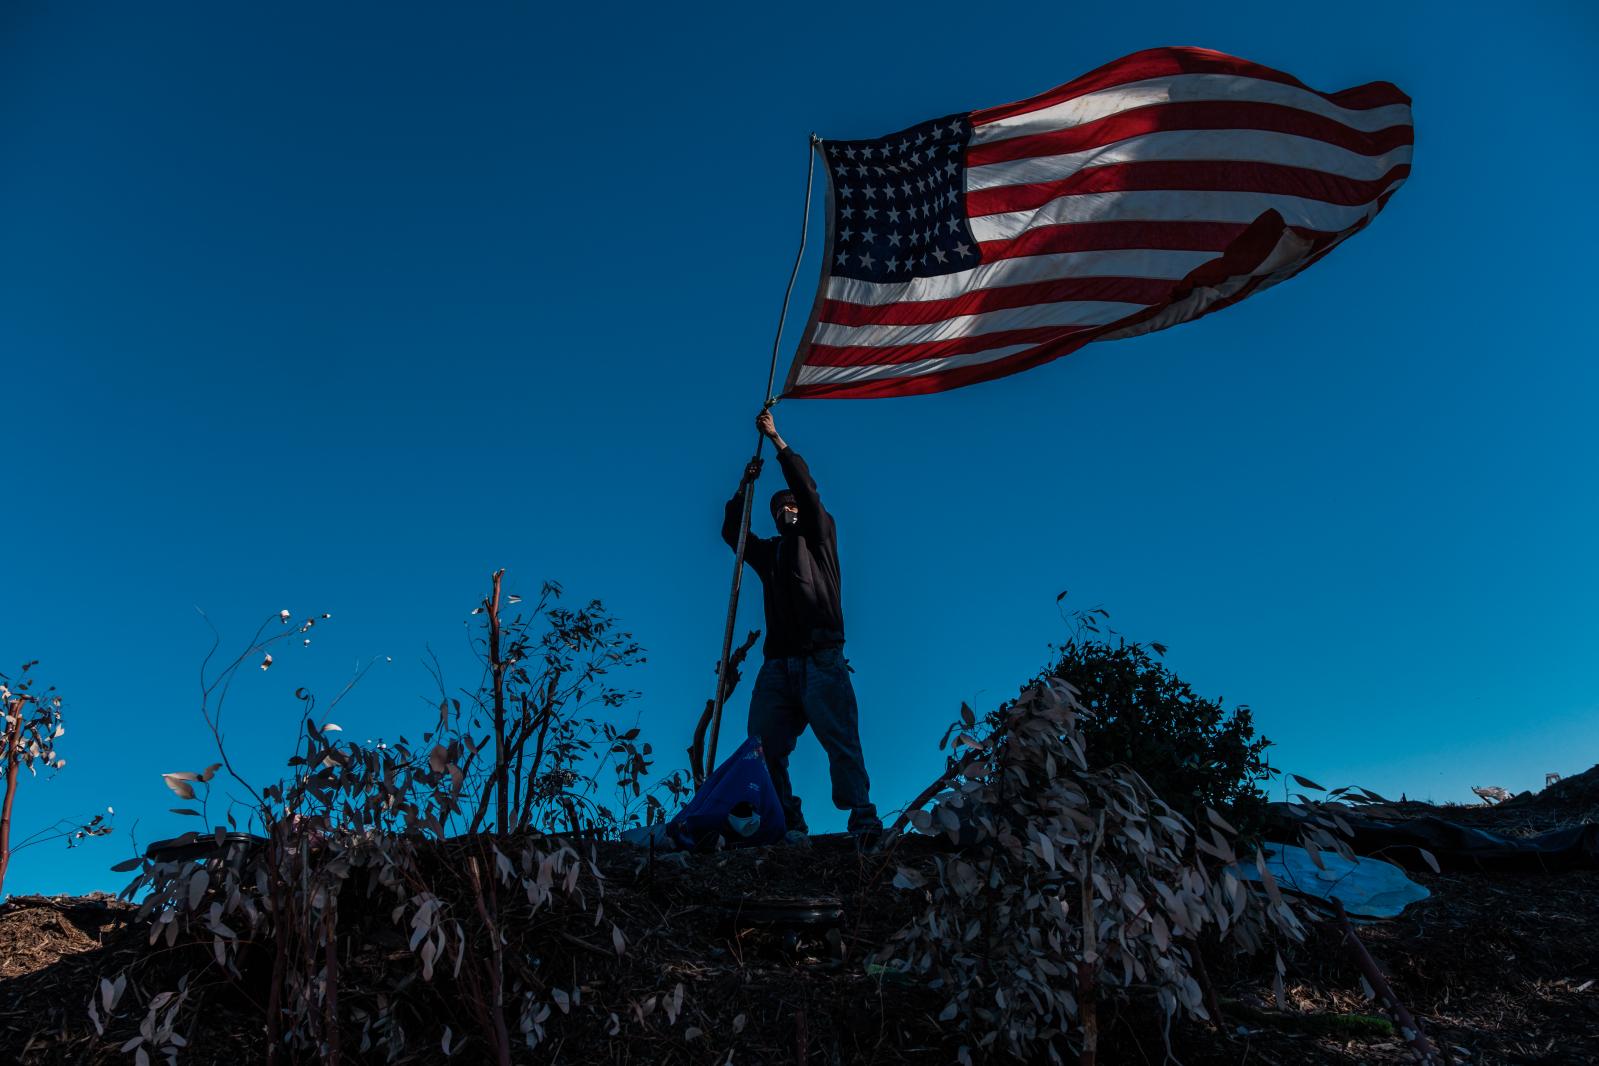 A man identified as Junior adjusts his American flag at the RV encampment where he lives on Thanksgiving day in San Francisco on Thursday, November 26, 2020.